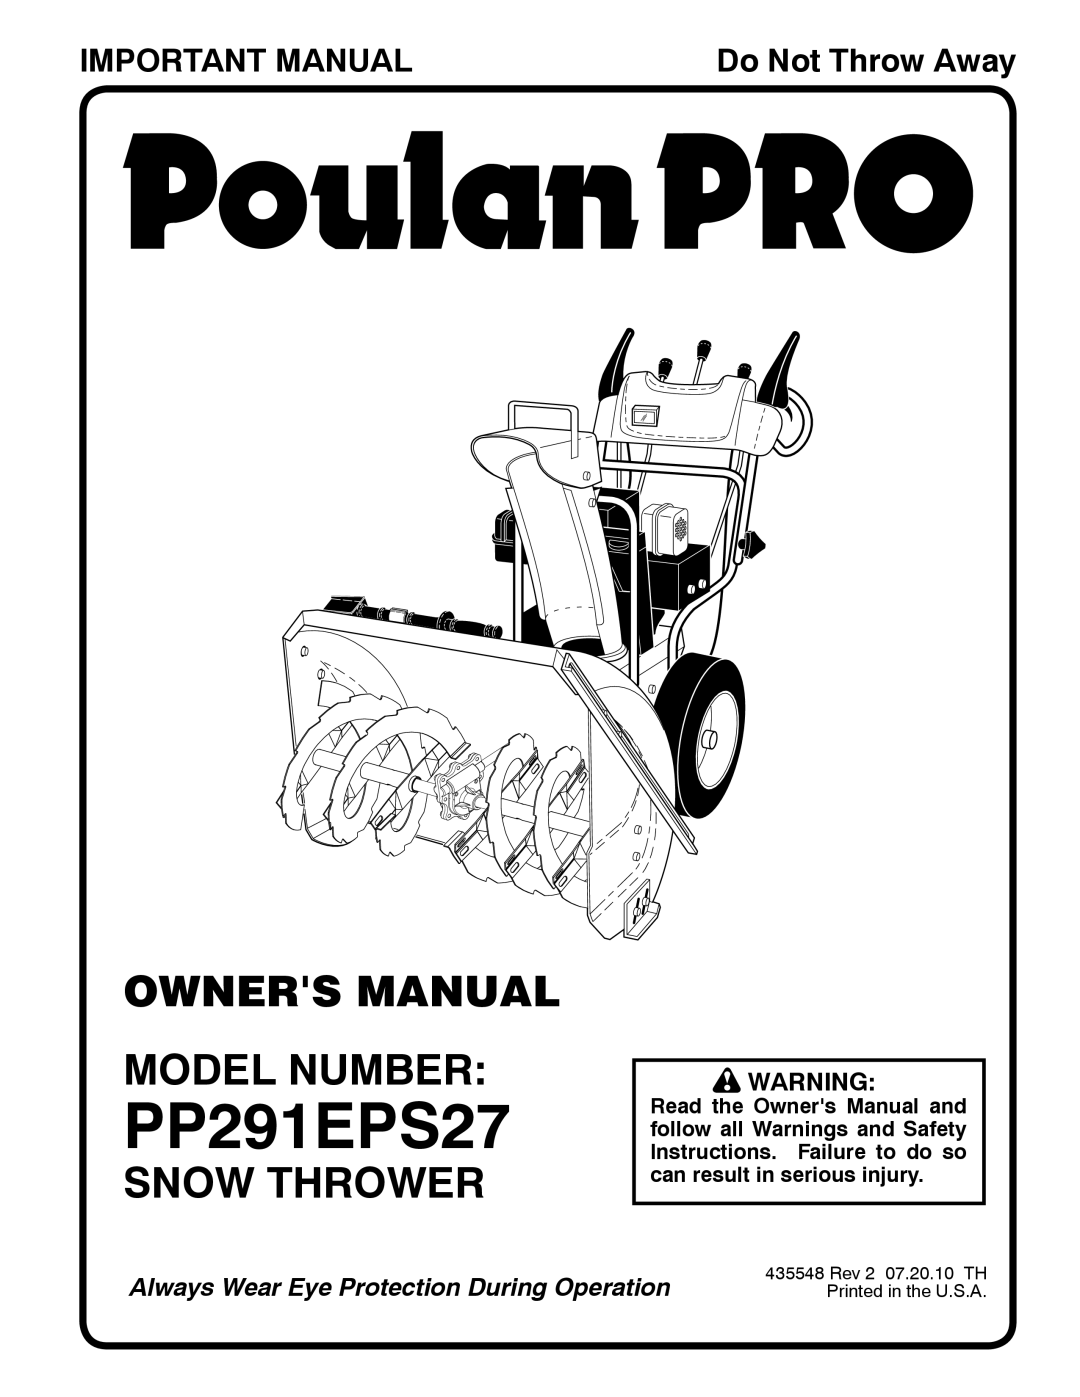 Poulan 96198002901 owner manual Owners Manual Model Number, Snow Thrower, Important Manual, PP291EPS27, Do Not Throw Away 